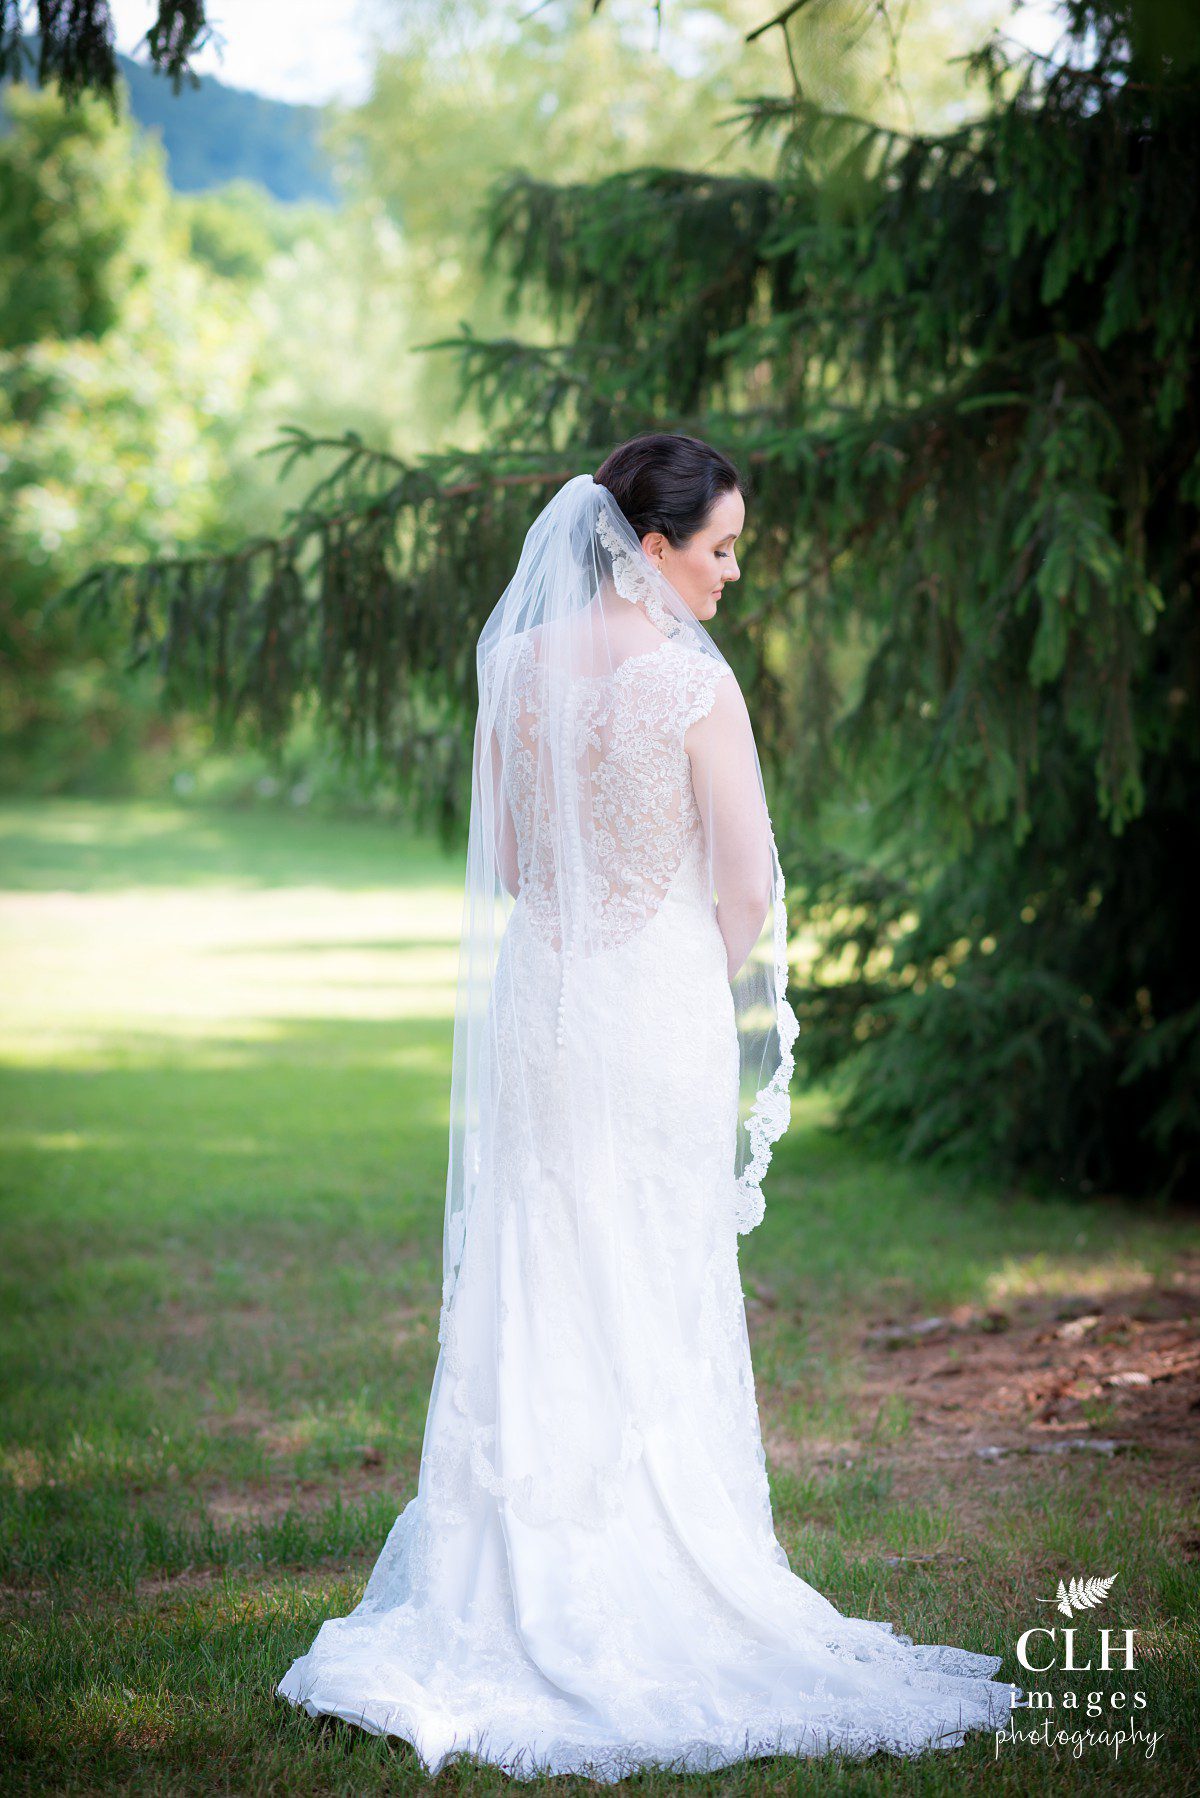 CLH images Photography Catskill New York Weddings Barn Weddings Rustic Weddings New York Wedding Photographer Becky and Harinder (54)